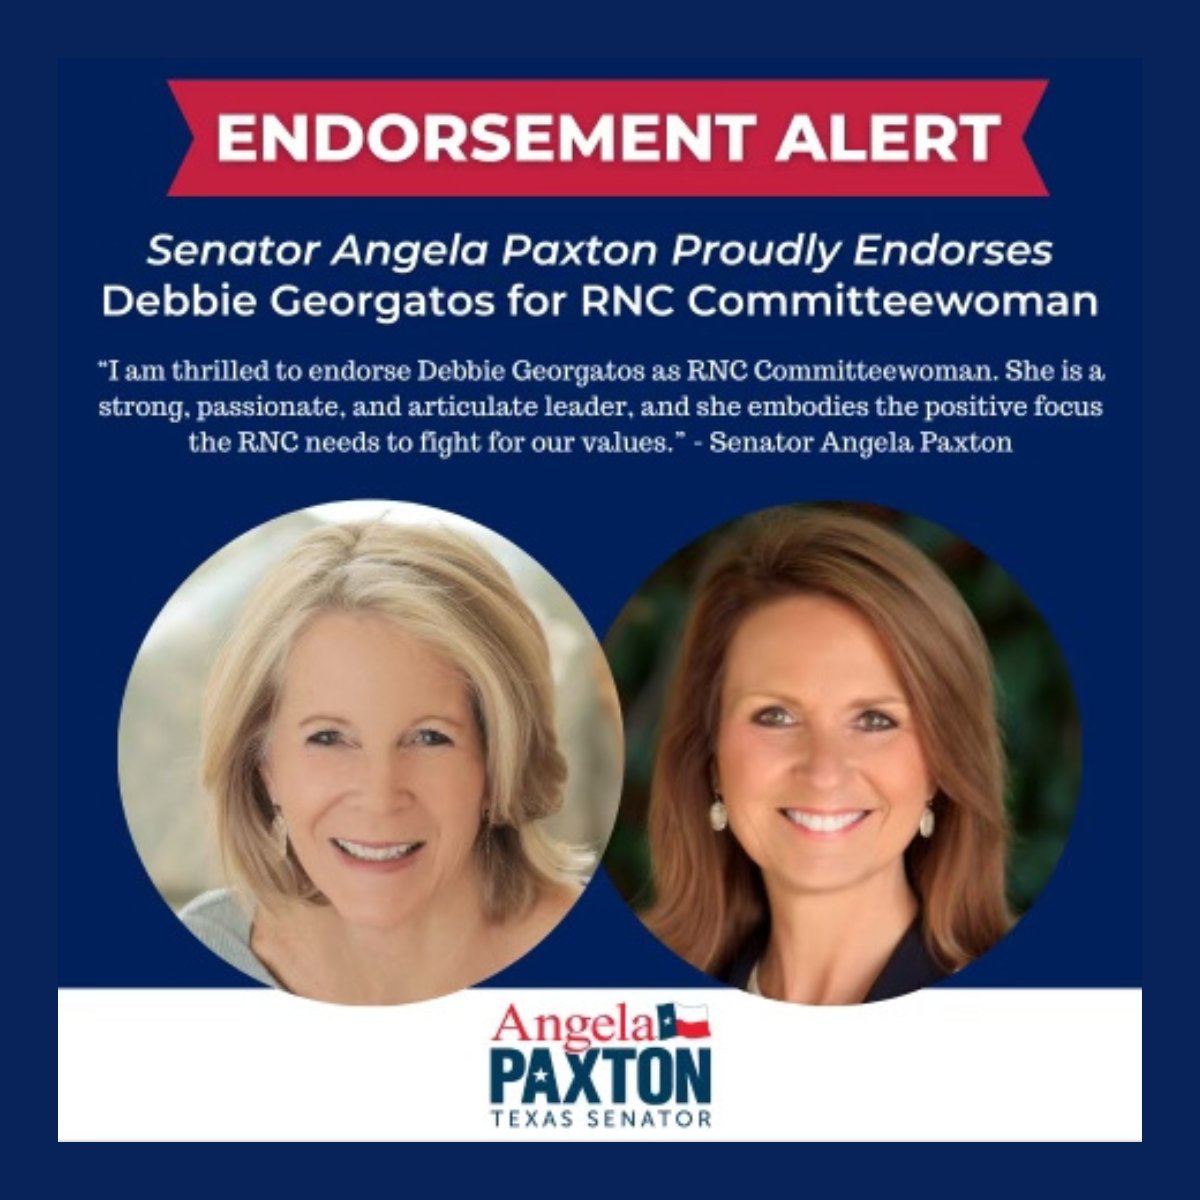 I SO appreciate @AngelaPaxtonTX! She is a stalwart conservative champion in the Texas legislature, she and I are so aligned in our determination to fight for the preservation of Texas and of America as the bastions of liberty MUST continue to be. Honored for Endorsement.